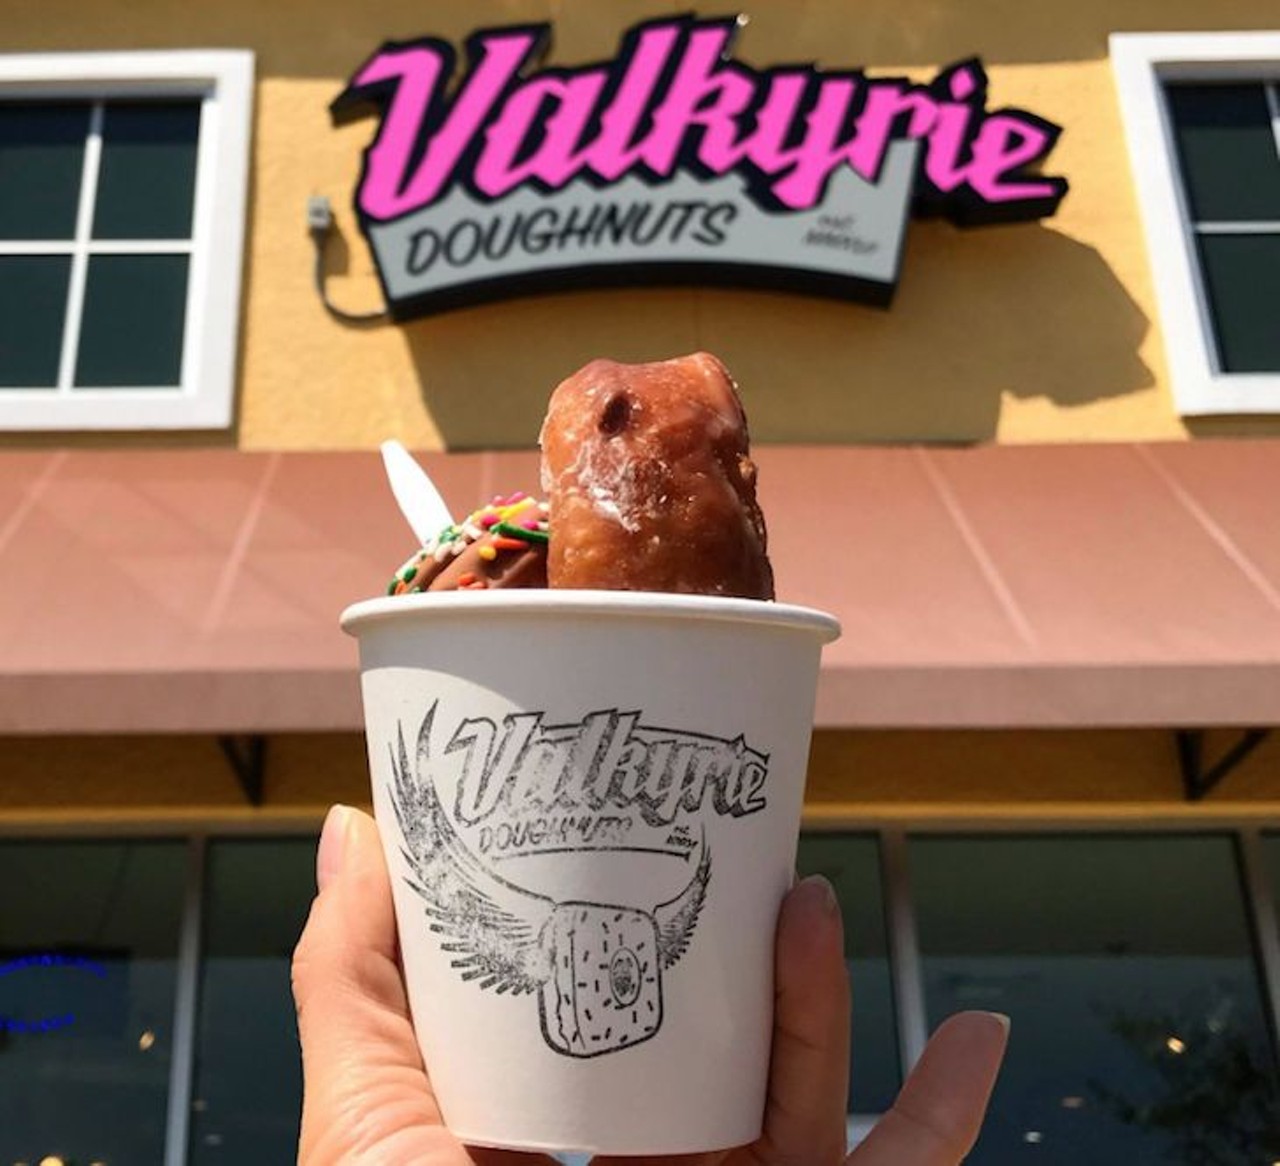 Valkyrie Doughnuts
160 12226 Corporate Blvd., Orlando
Valkyrie&#146;s doughnuts are delicious, made from scratch and vegan. You&#146;ll be in heaven with twelve different options, and just as lucky if you&#146;re there when the glazed doughnuts come out.
Photo via Valkyrie Doughnuts/Facebook